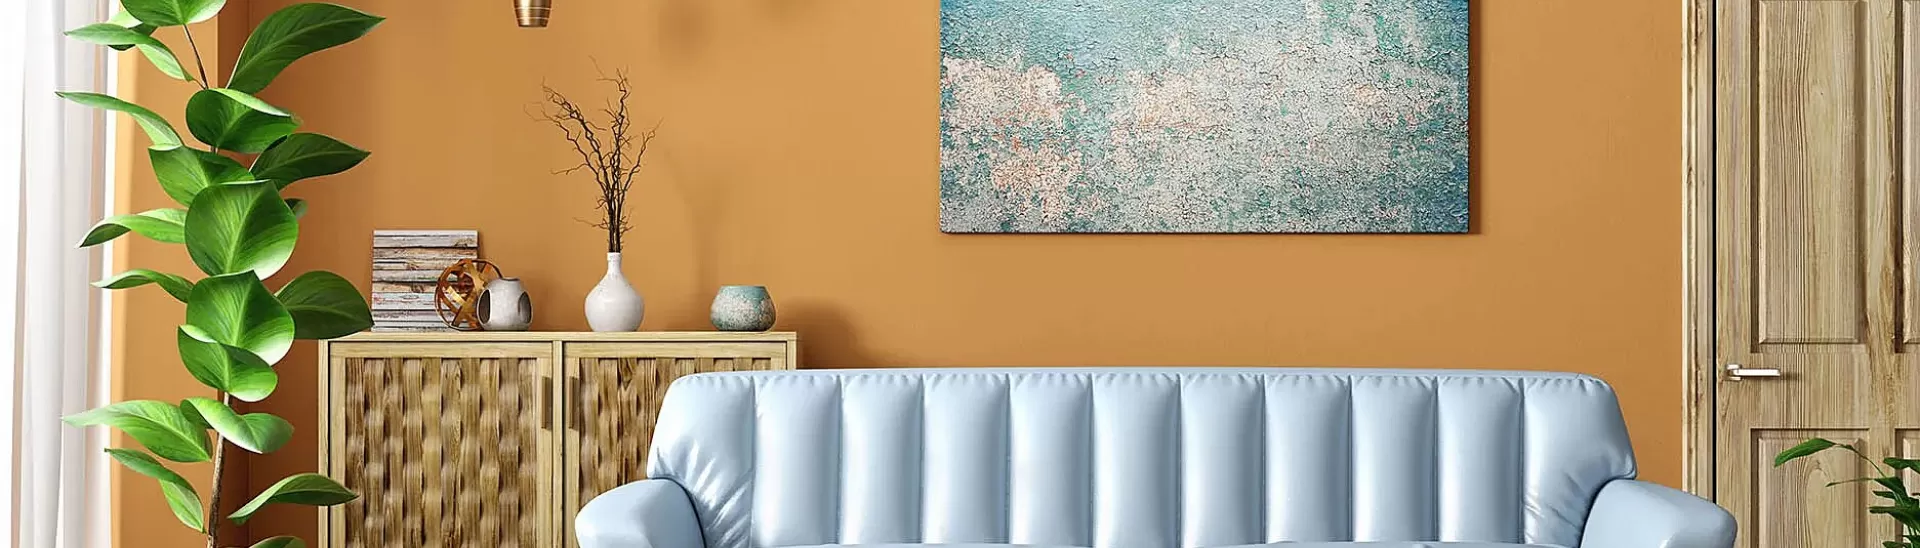 Top 10 Colour Combination for Walls with Images